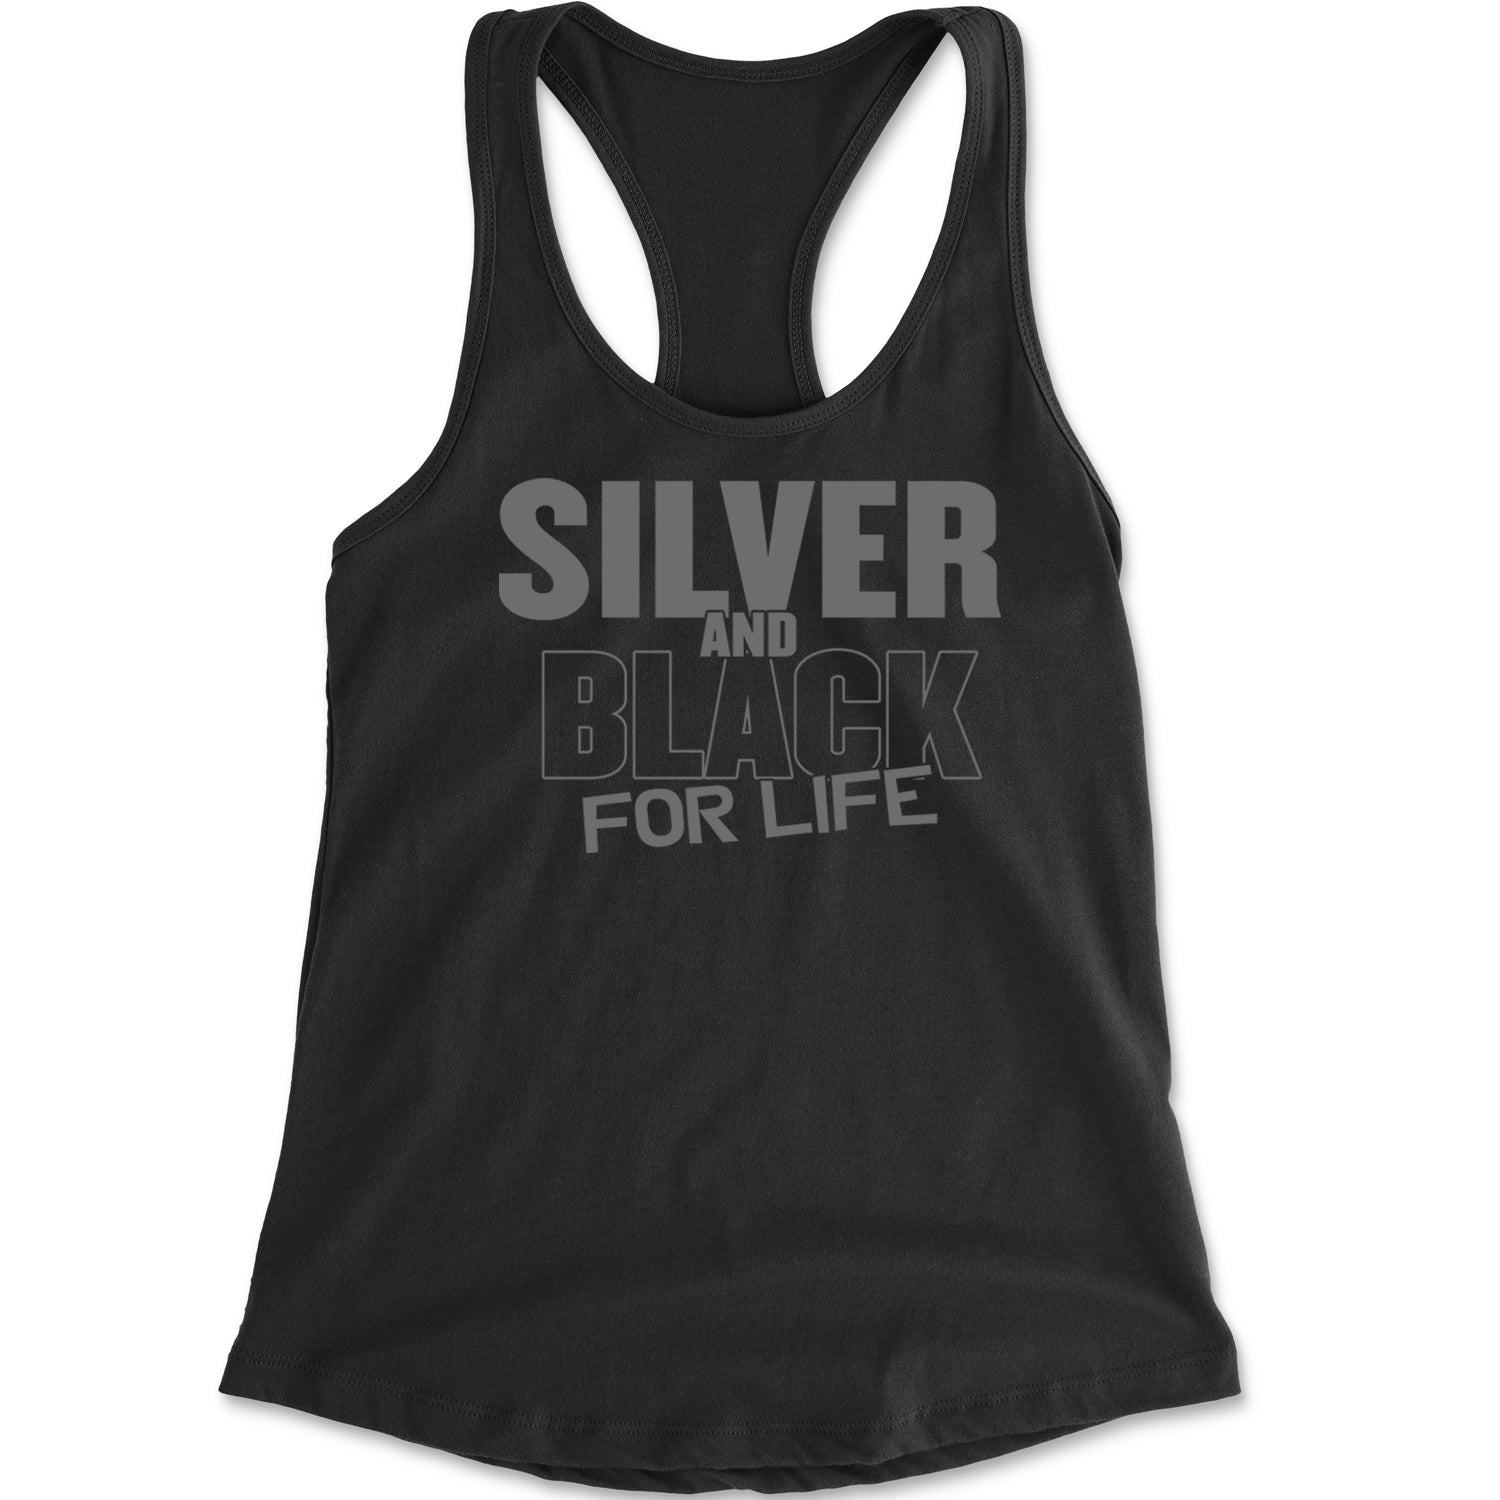 Silver And Black For Life Football Fan Racerback Tank Top for Women